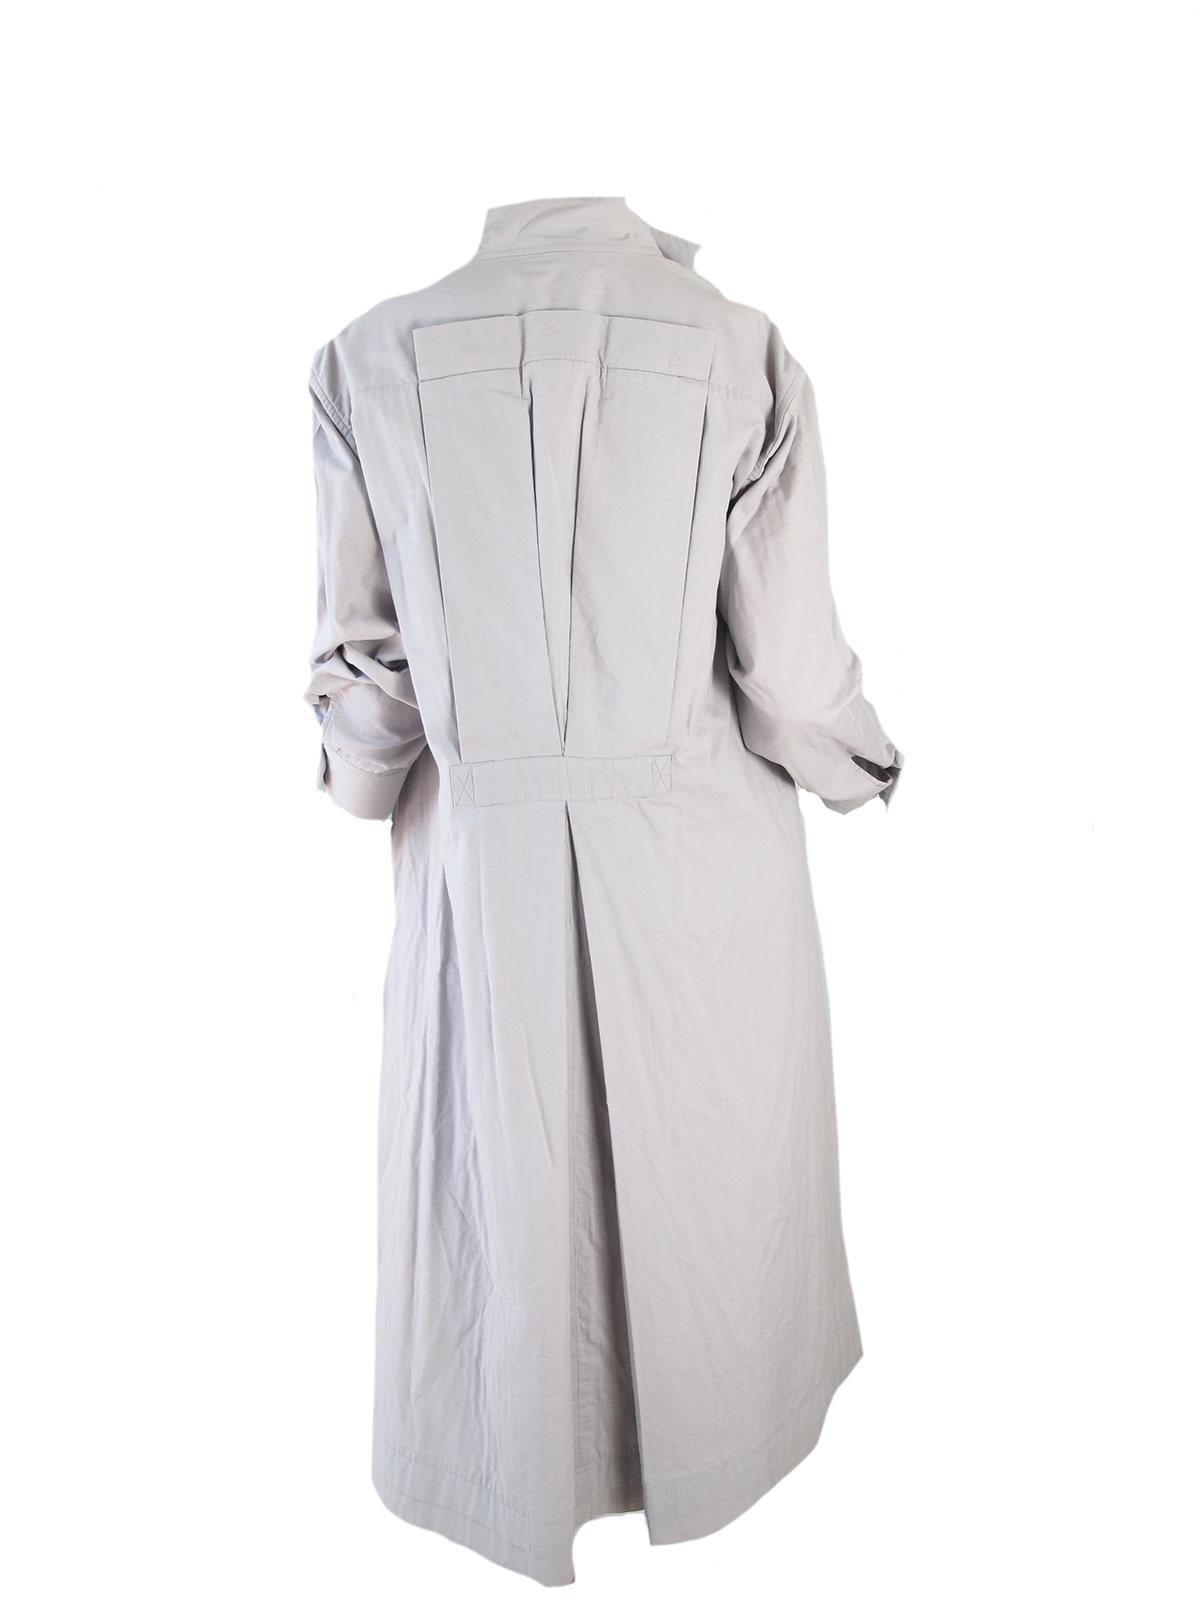 Issey Miyake grey cotton dress. Ruffle at neck, pleat at back. Condition: Excellent, labeled size XS ( mannequin is US size 6 )